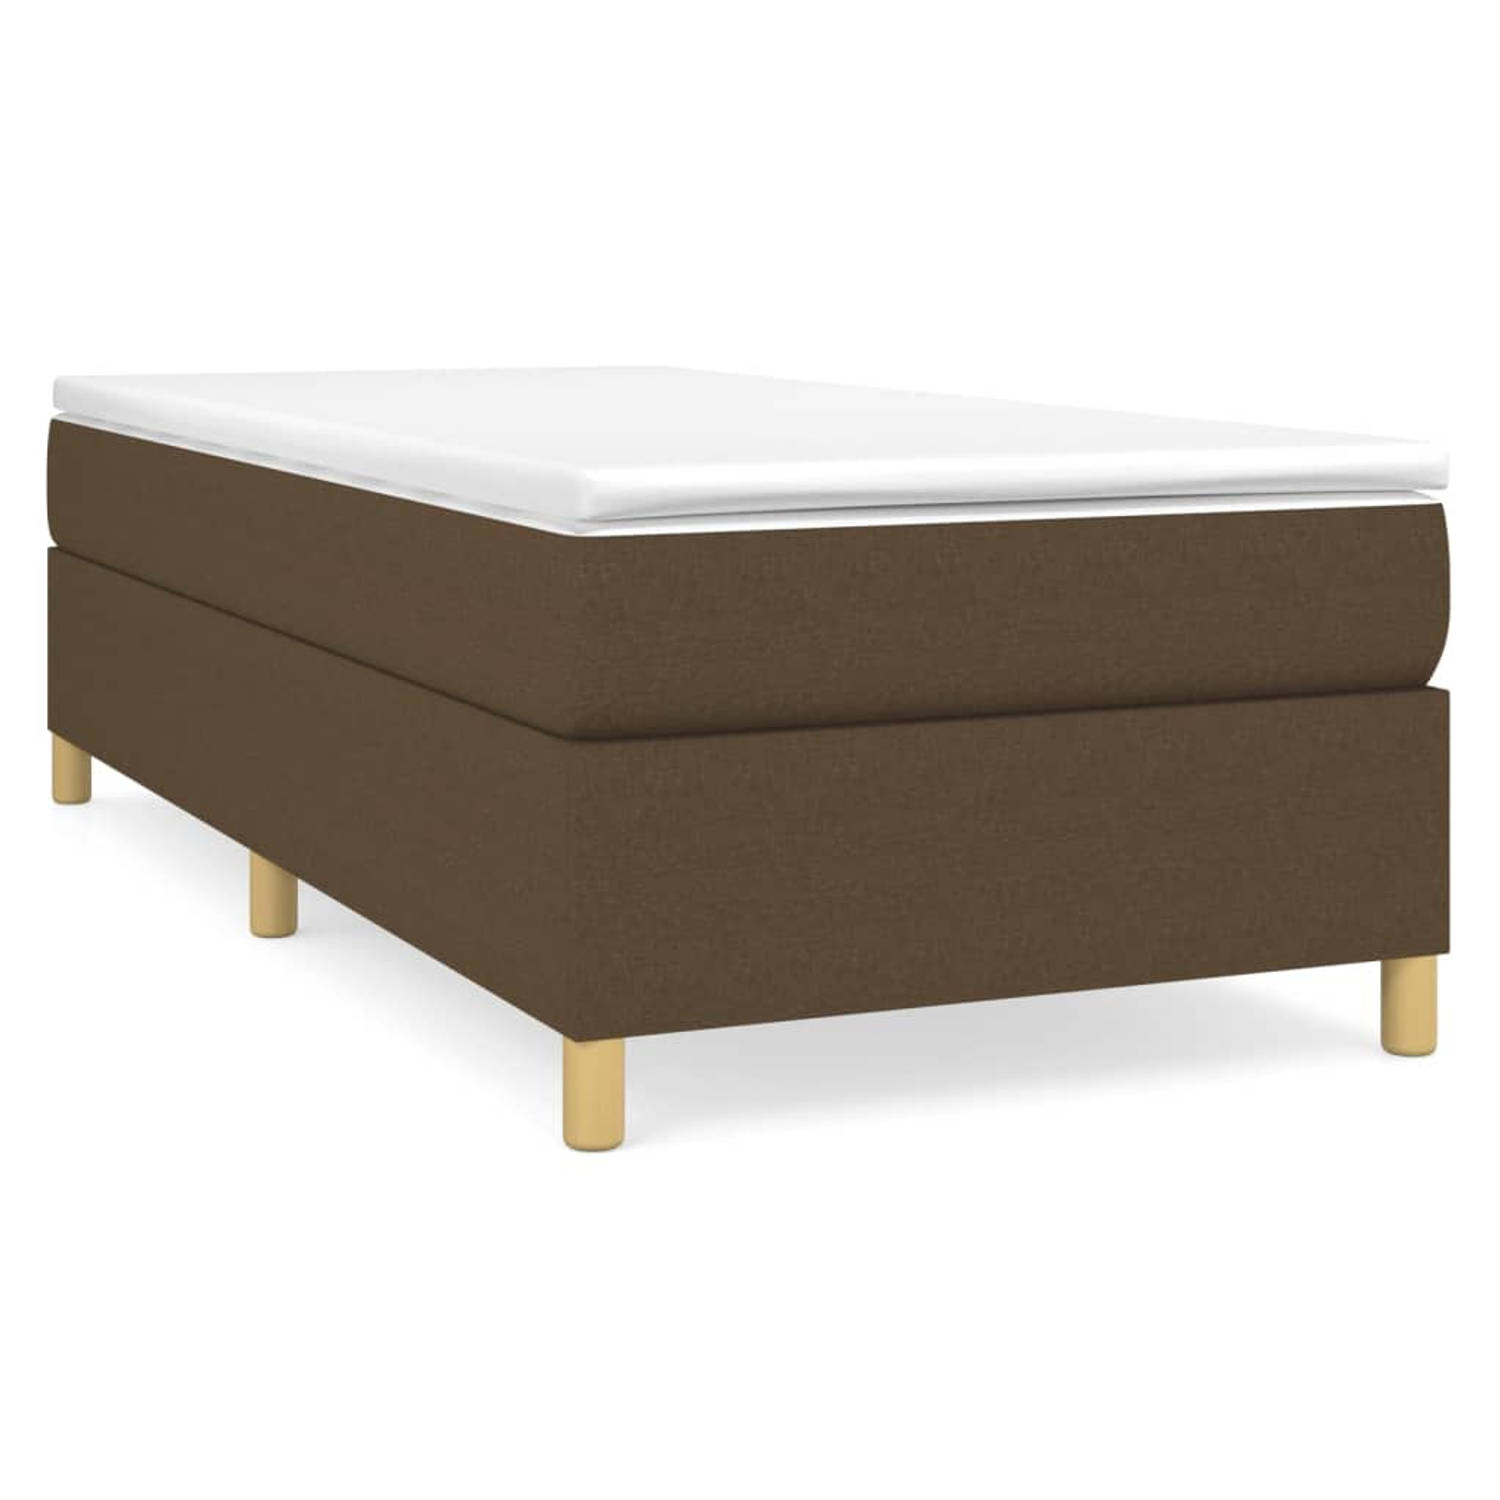 The Living Store Bed The Living Store Boxspring - 203 x 80 x 35 cm - donkerbruin - stof - multiplex - bewerkt hout